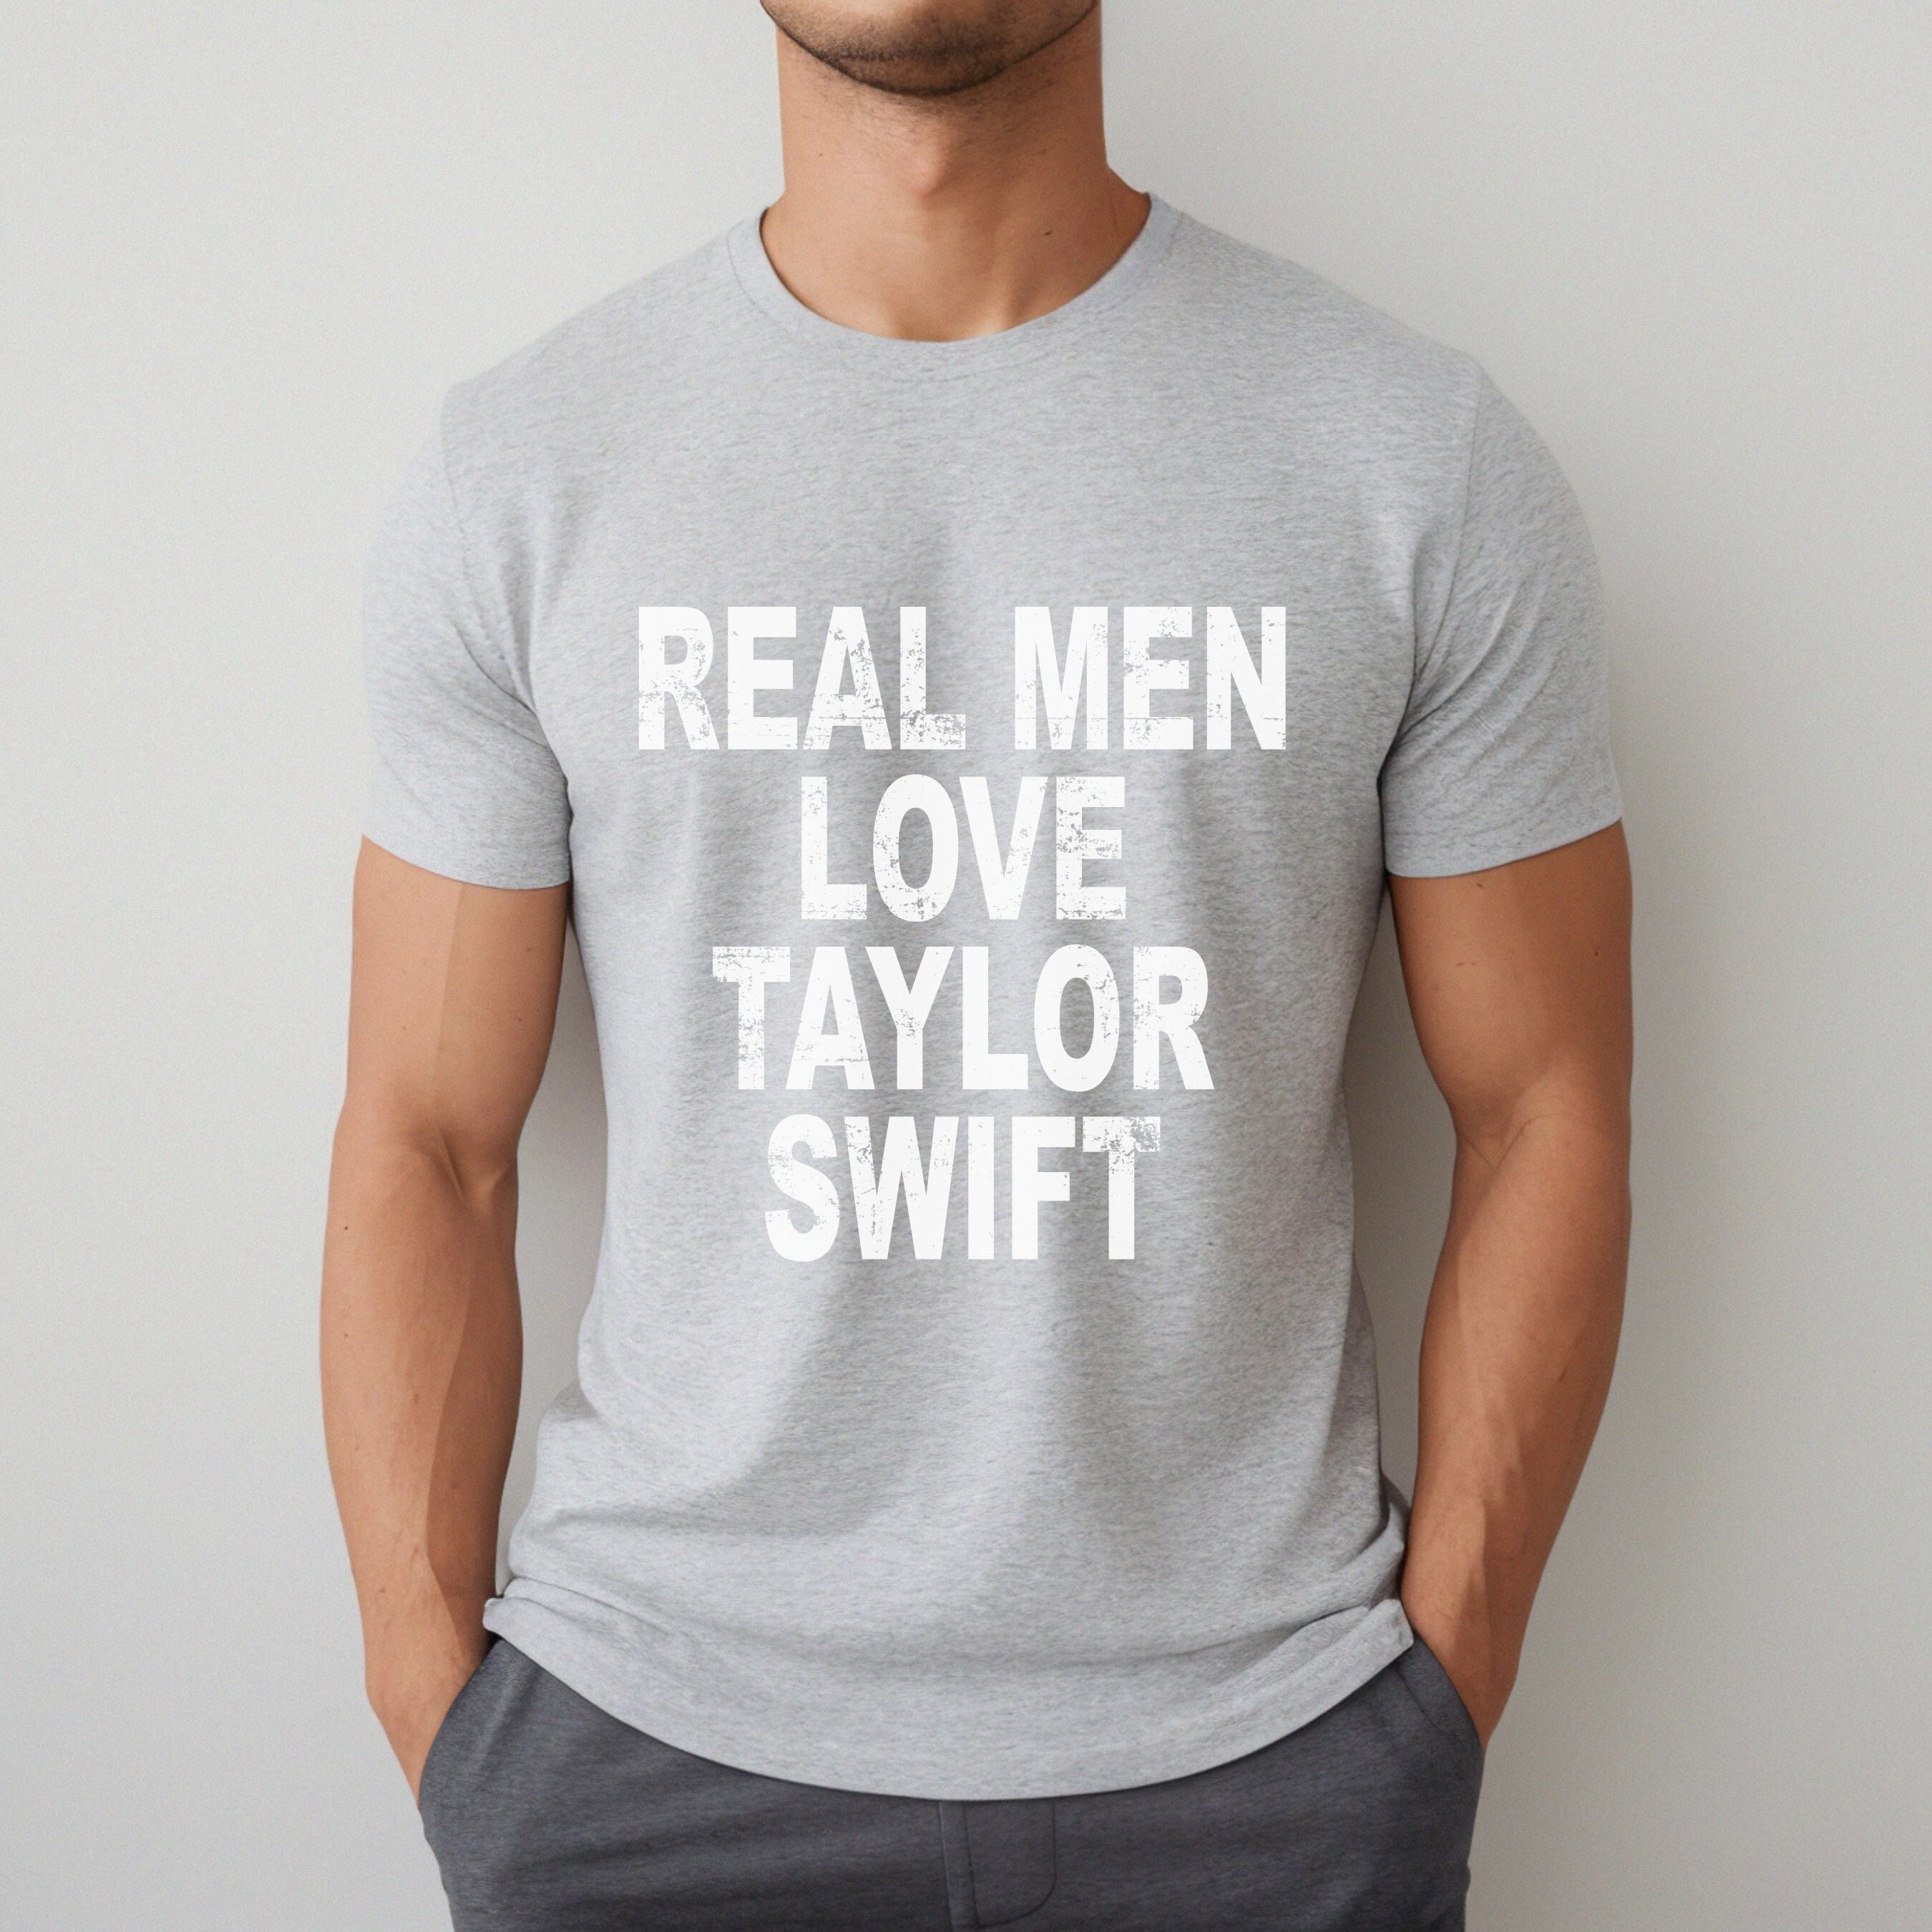 Swiftie by Marriage Shirt - Sweet & Saucy Designs